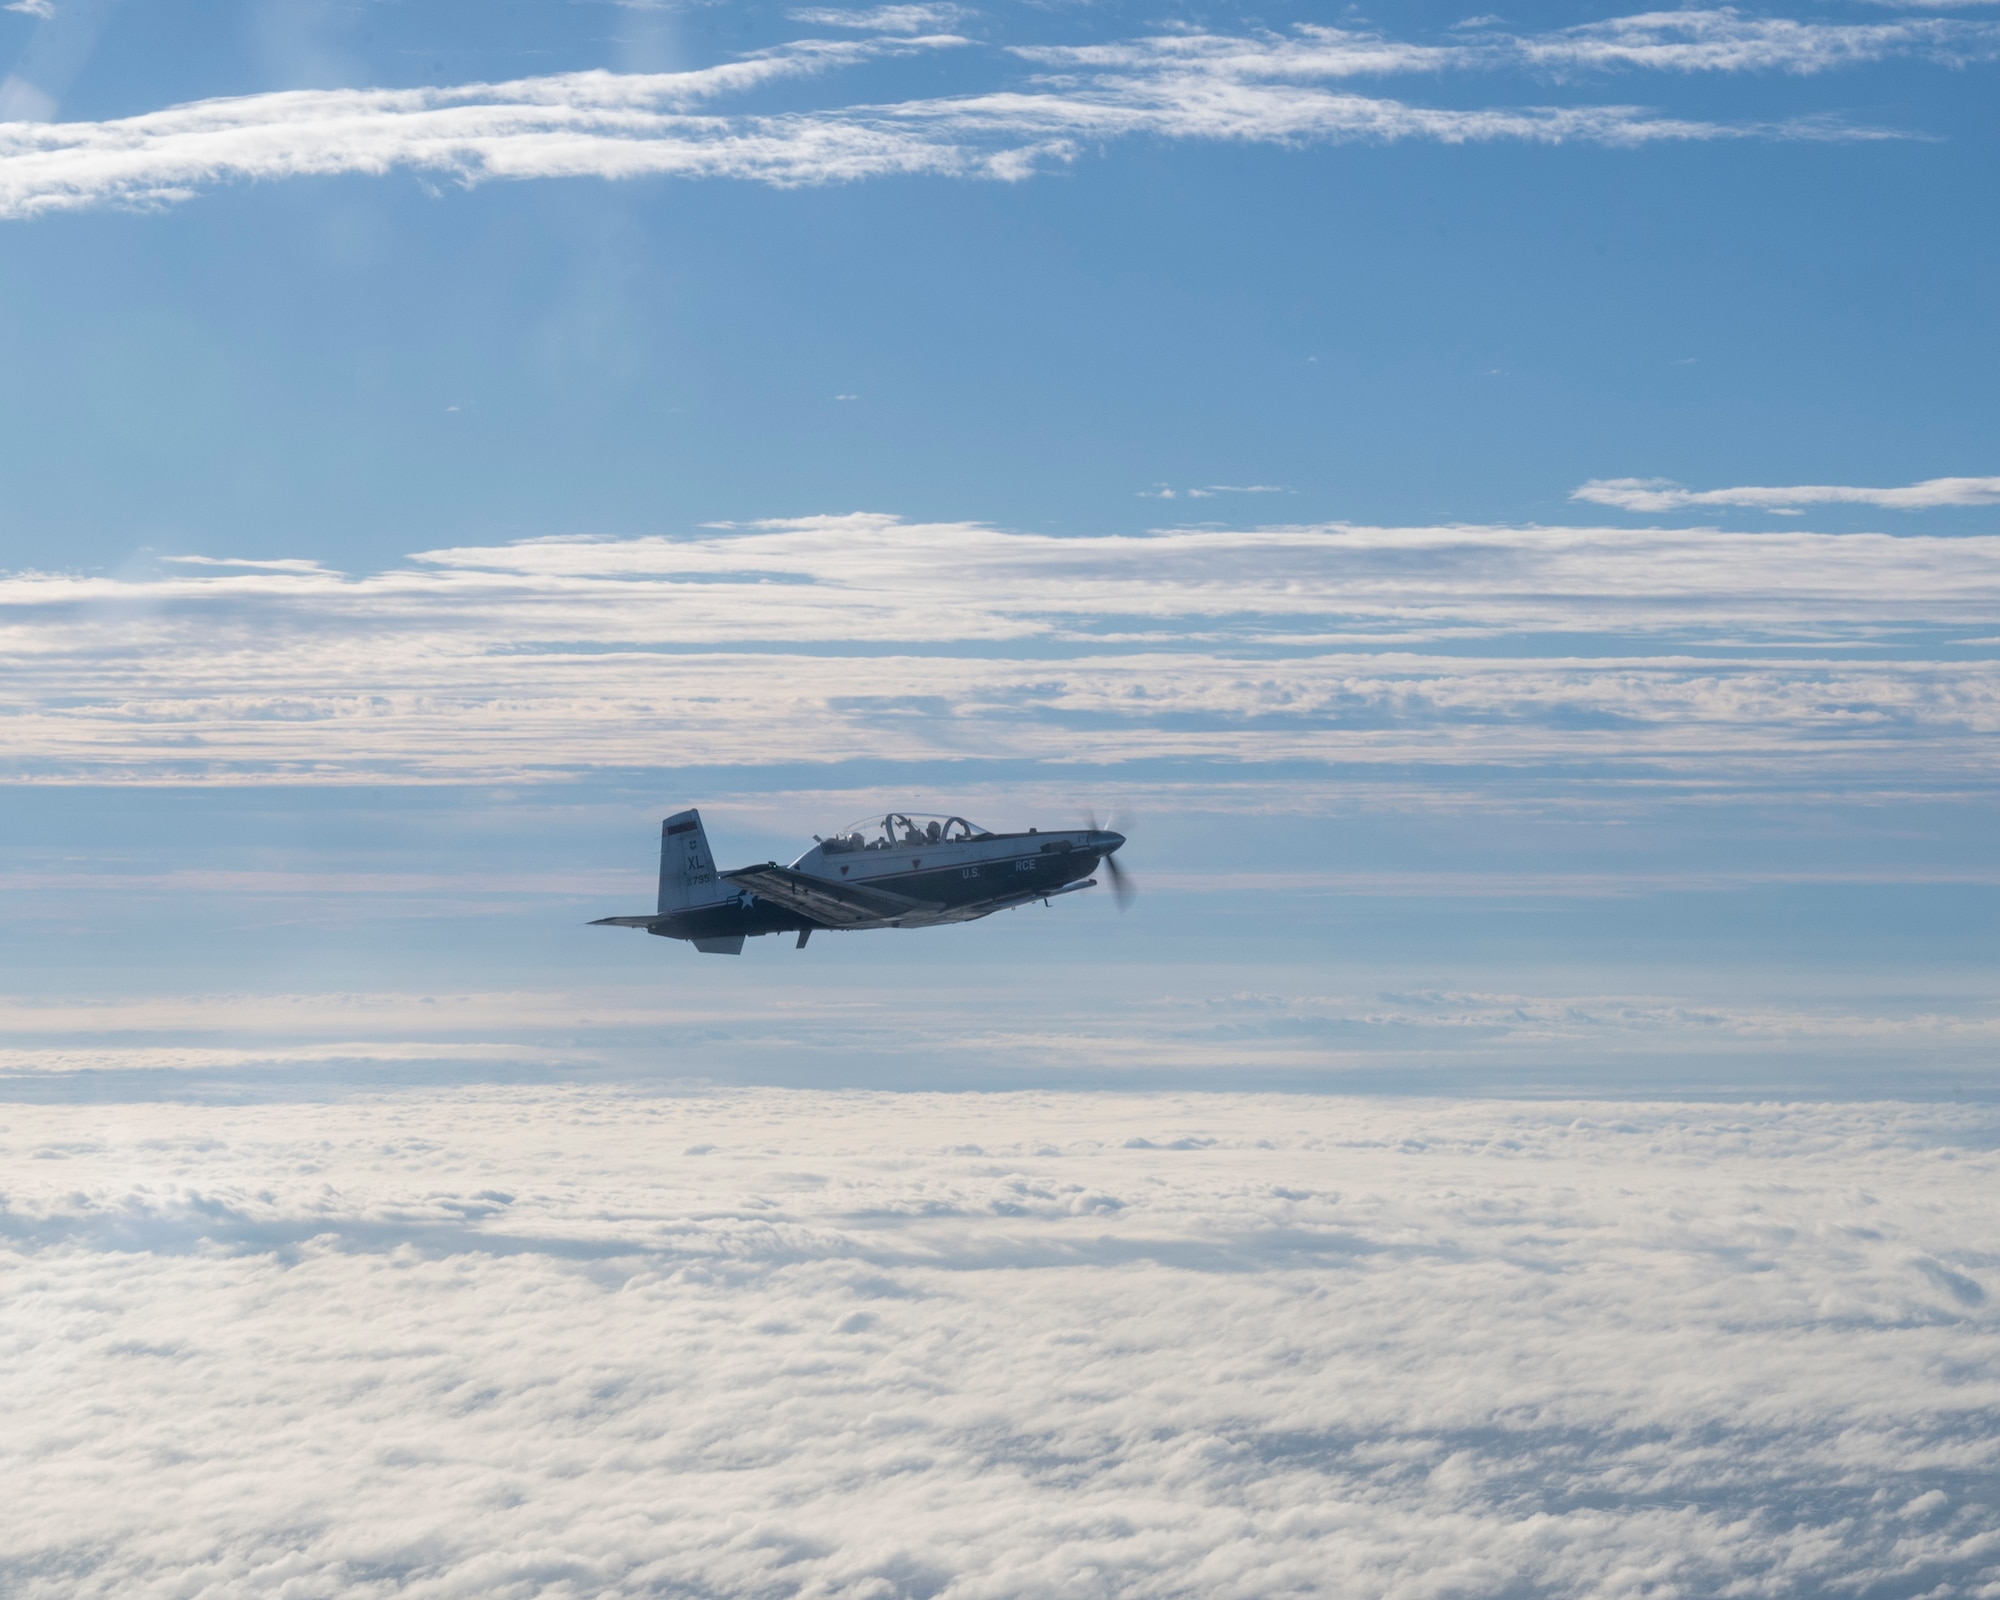 A T-6 Texan II flies from MacDill Air Force Base, Florida, to Eglin Air Force Base, Florida, as part of Ambush Florida on Oct. 14, 2022. Ambush Florida is a mission where pilots from the 85th Flying Training Squadron fly to a different region of the U.S. and "ambush" other bases helping pilots gain experience in long distance flights. (U.S. Air Force photo by Senior Airman Nicholas Larsen.)